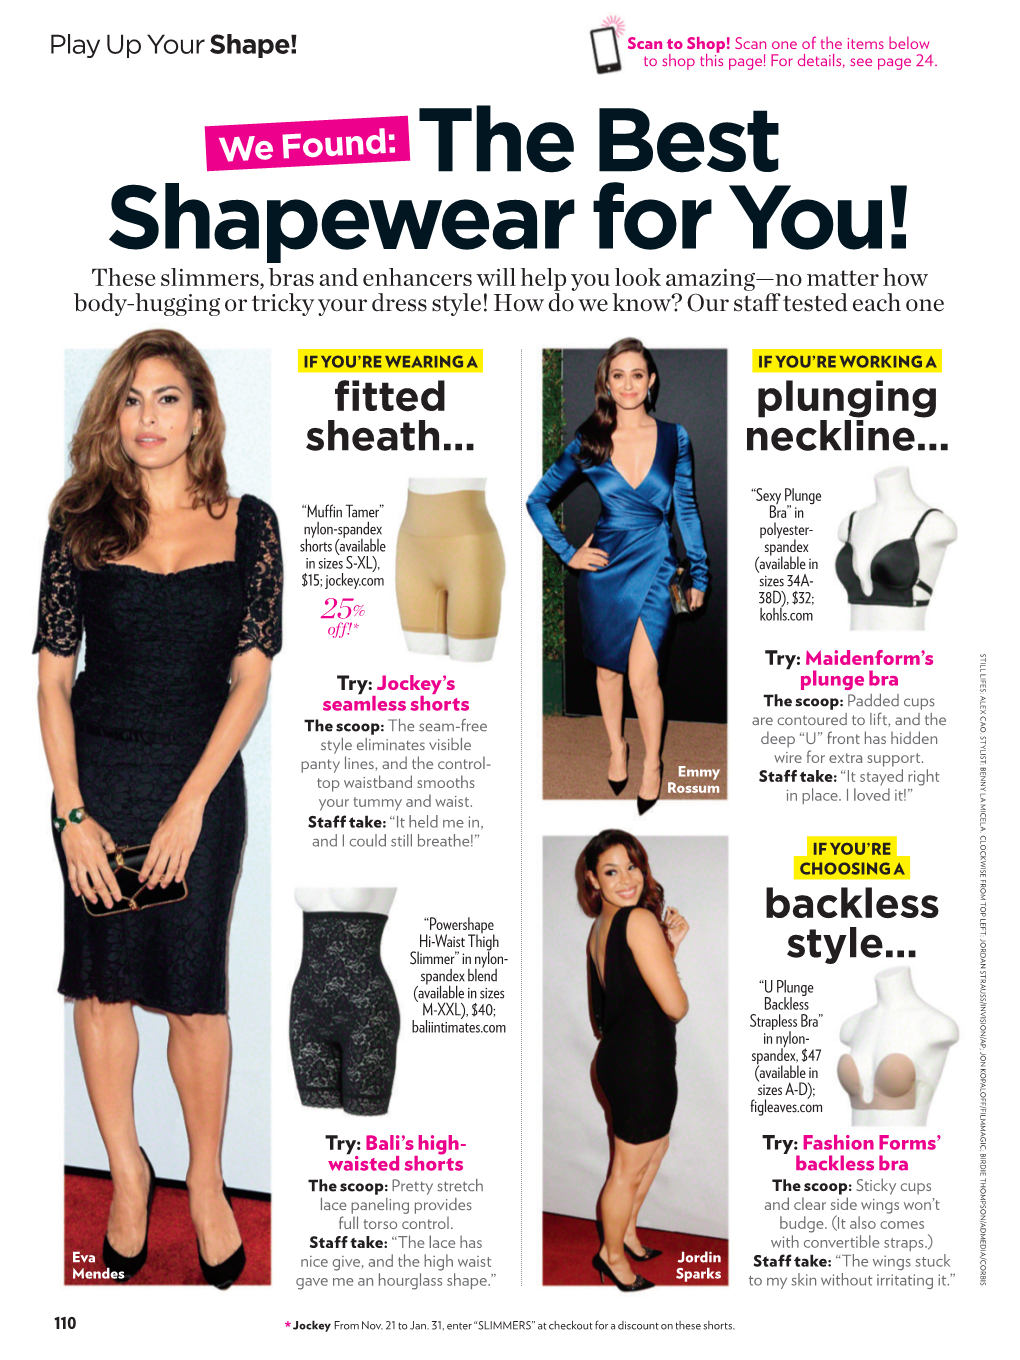 The Best Shapewear for You!